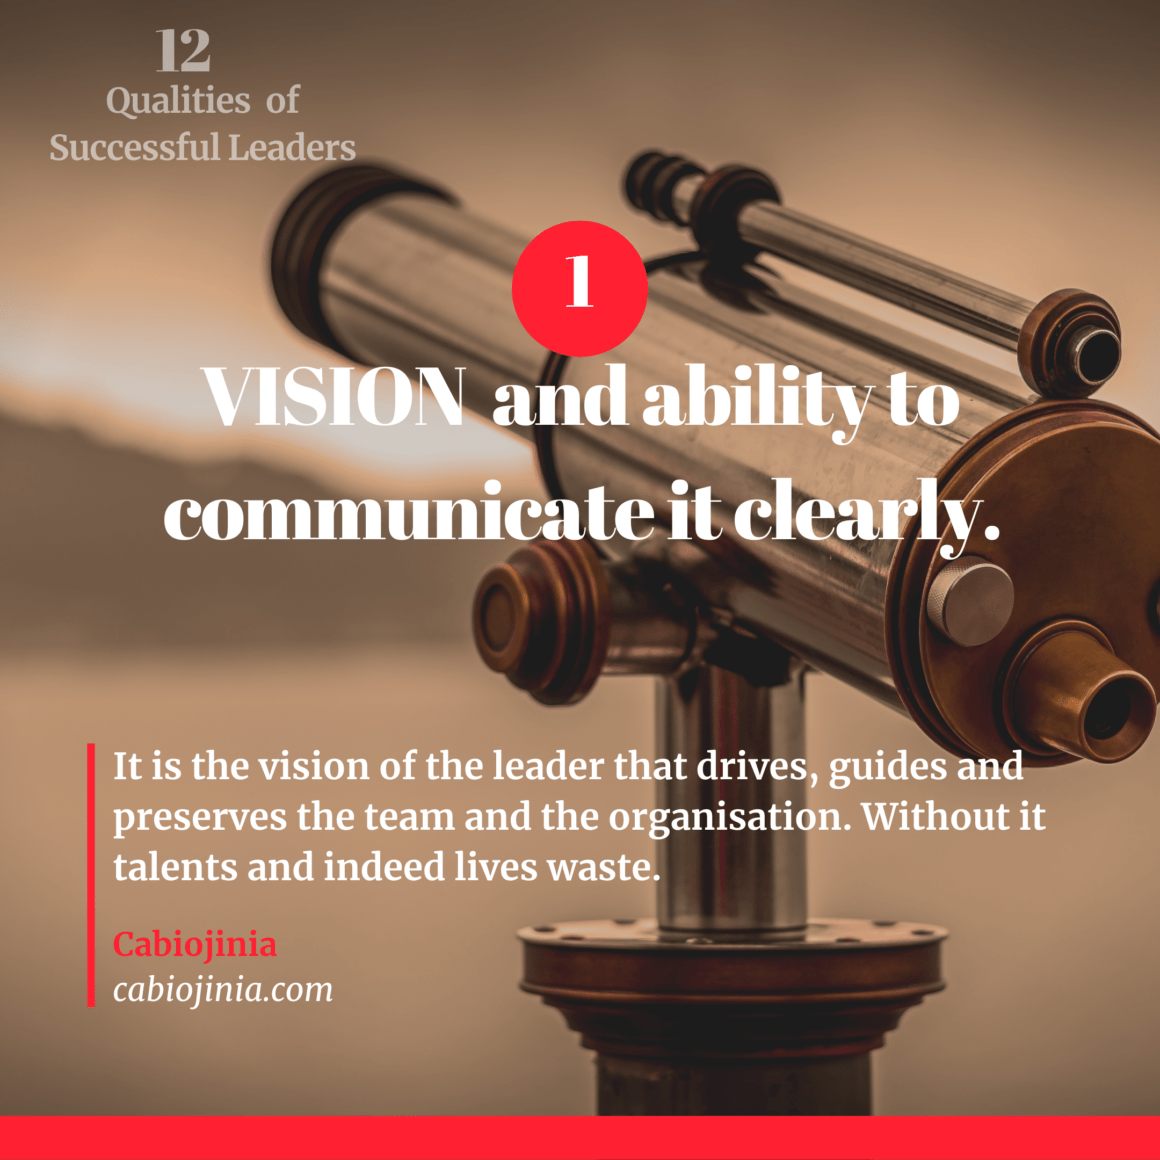 vision and ability to communicate clearly. cabiojinia